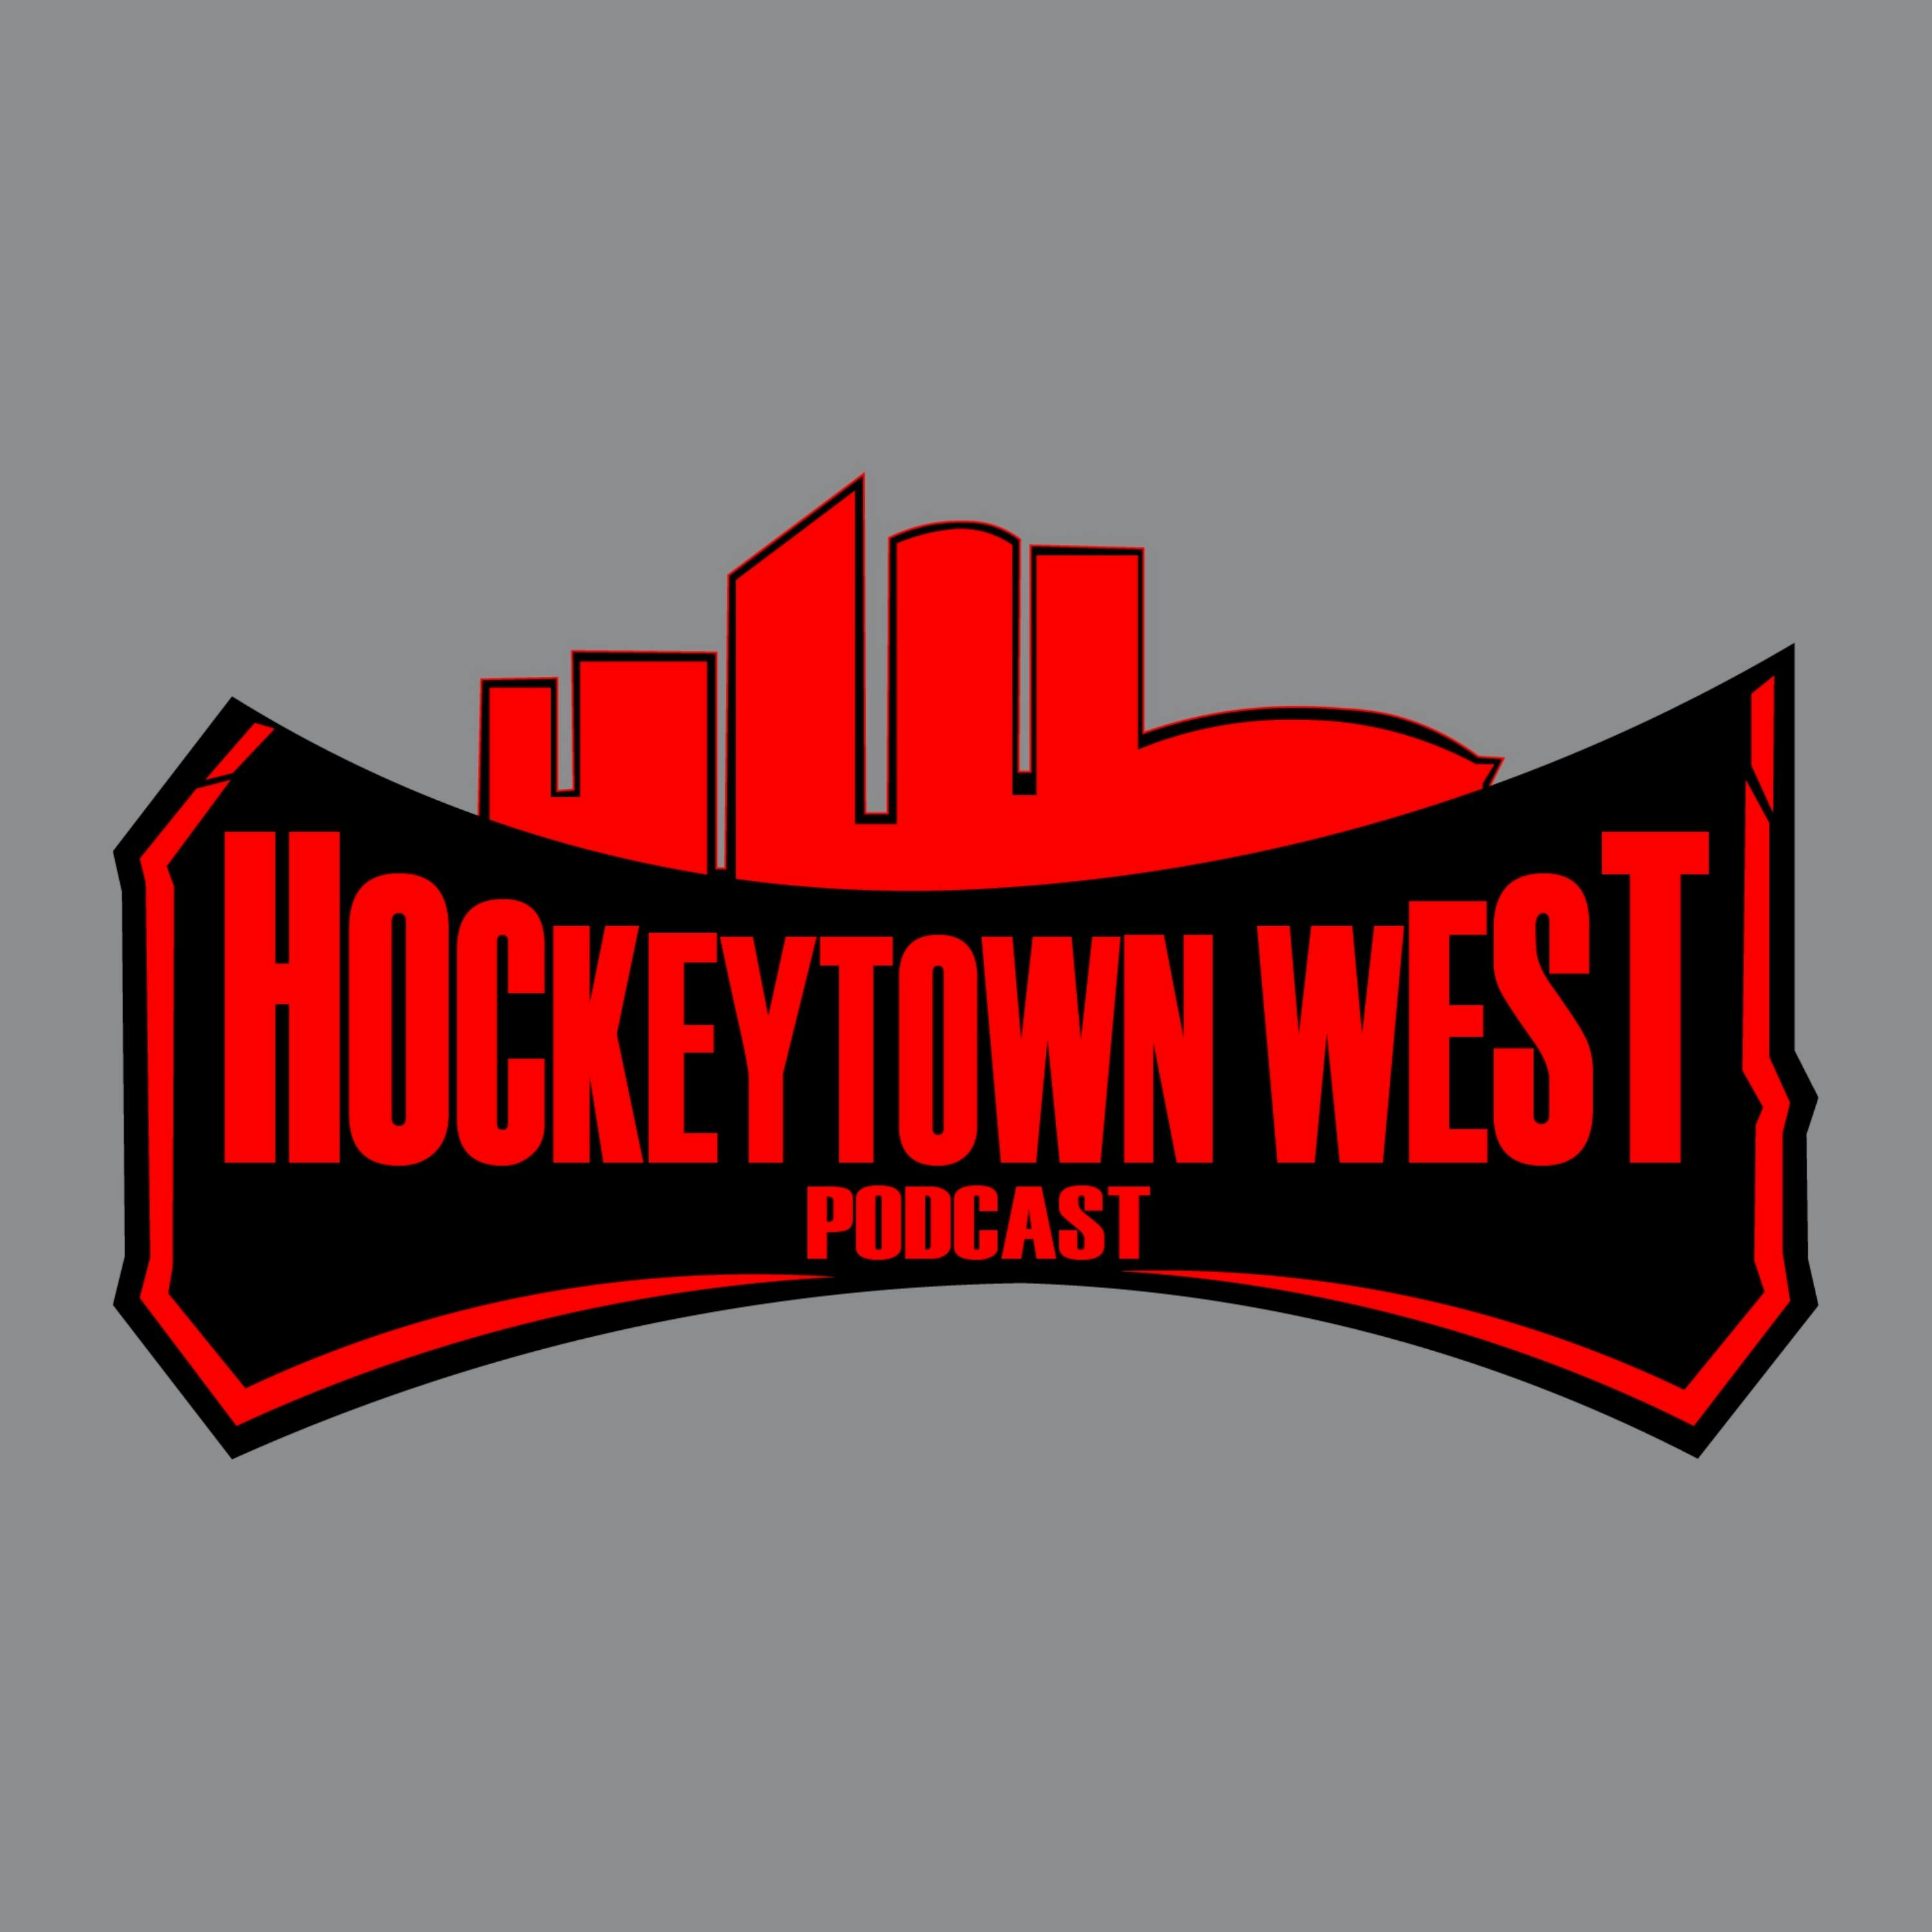 Hockeytown West Podcast